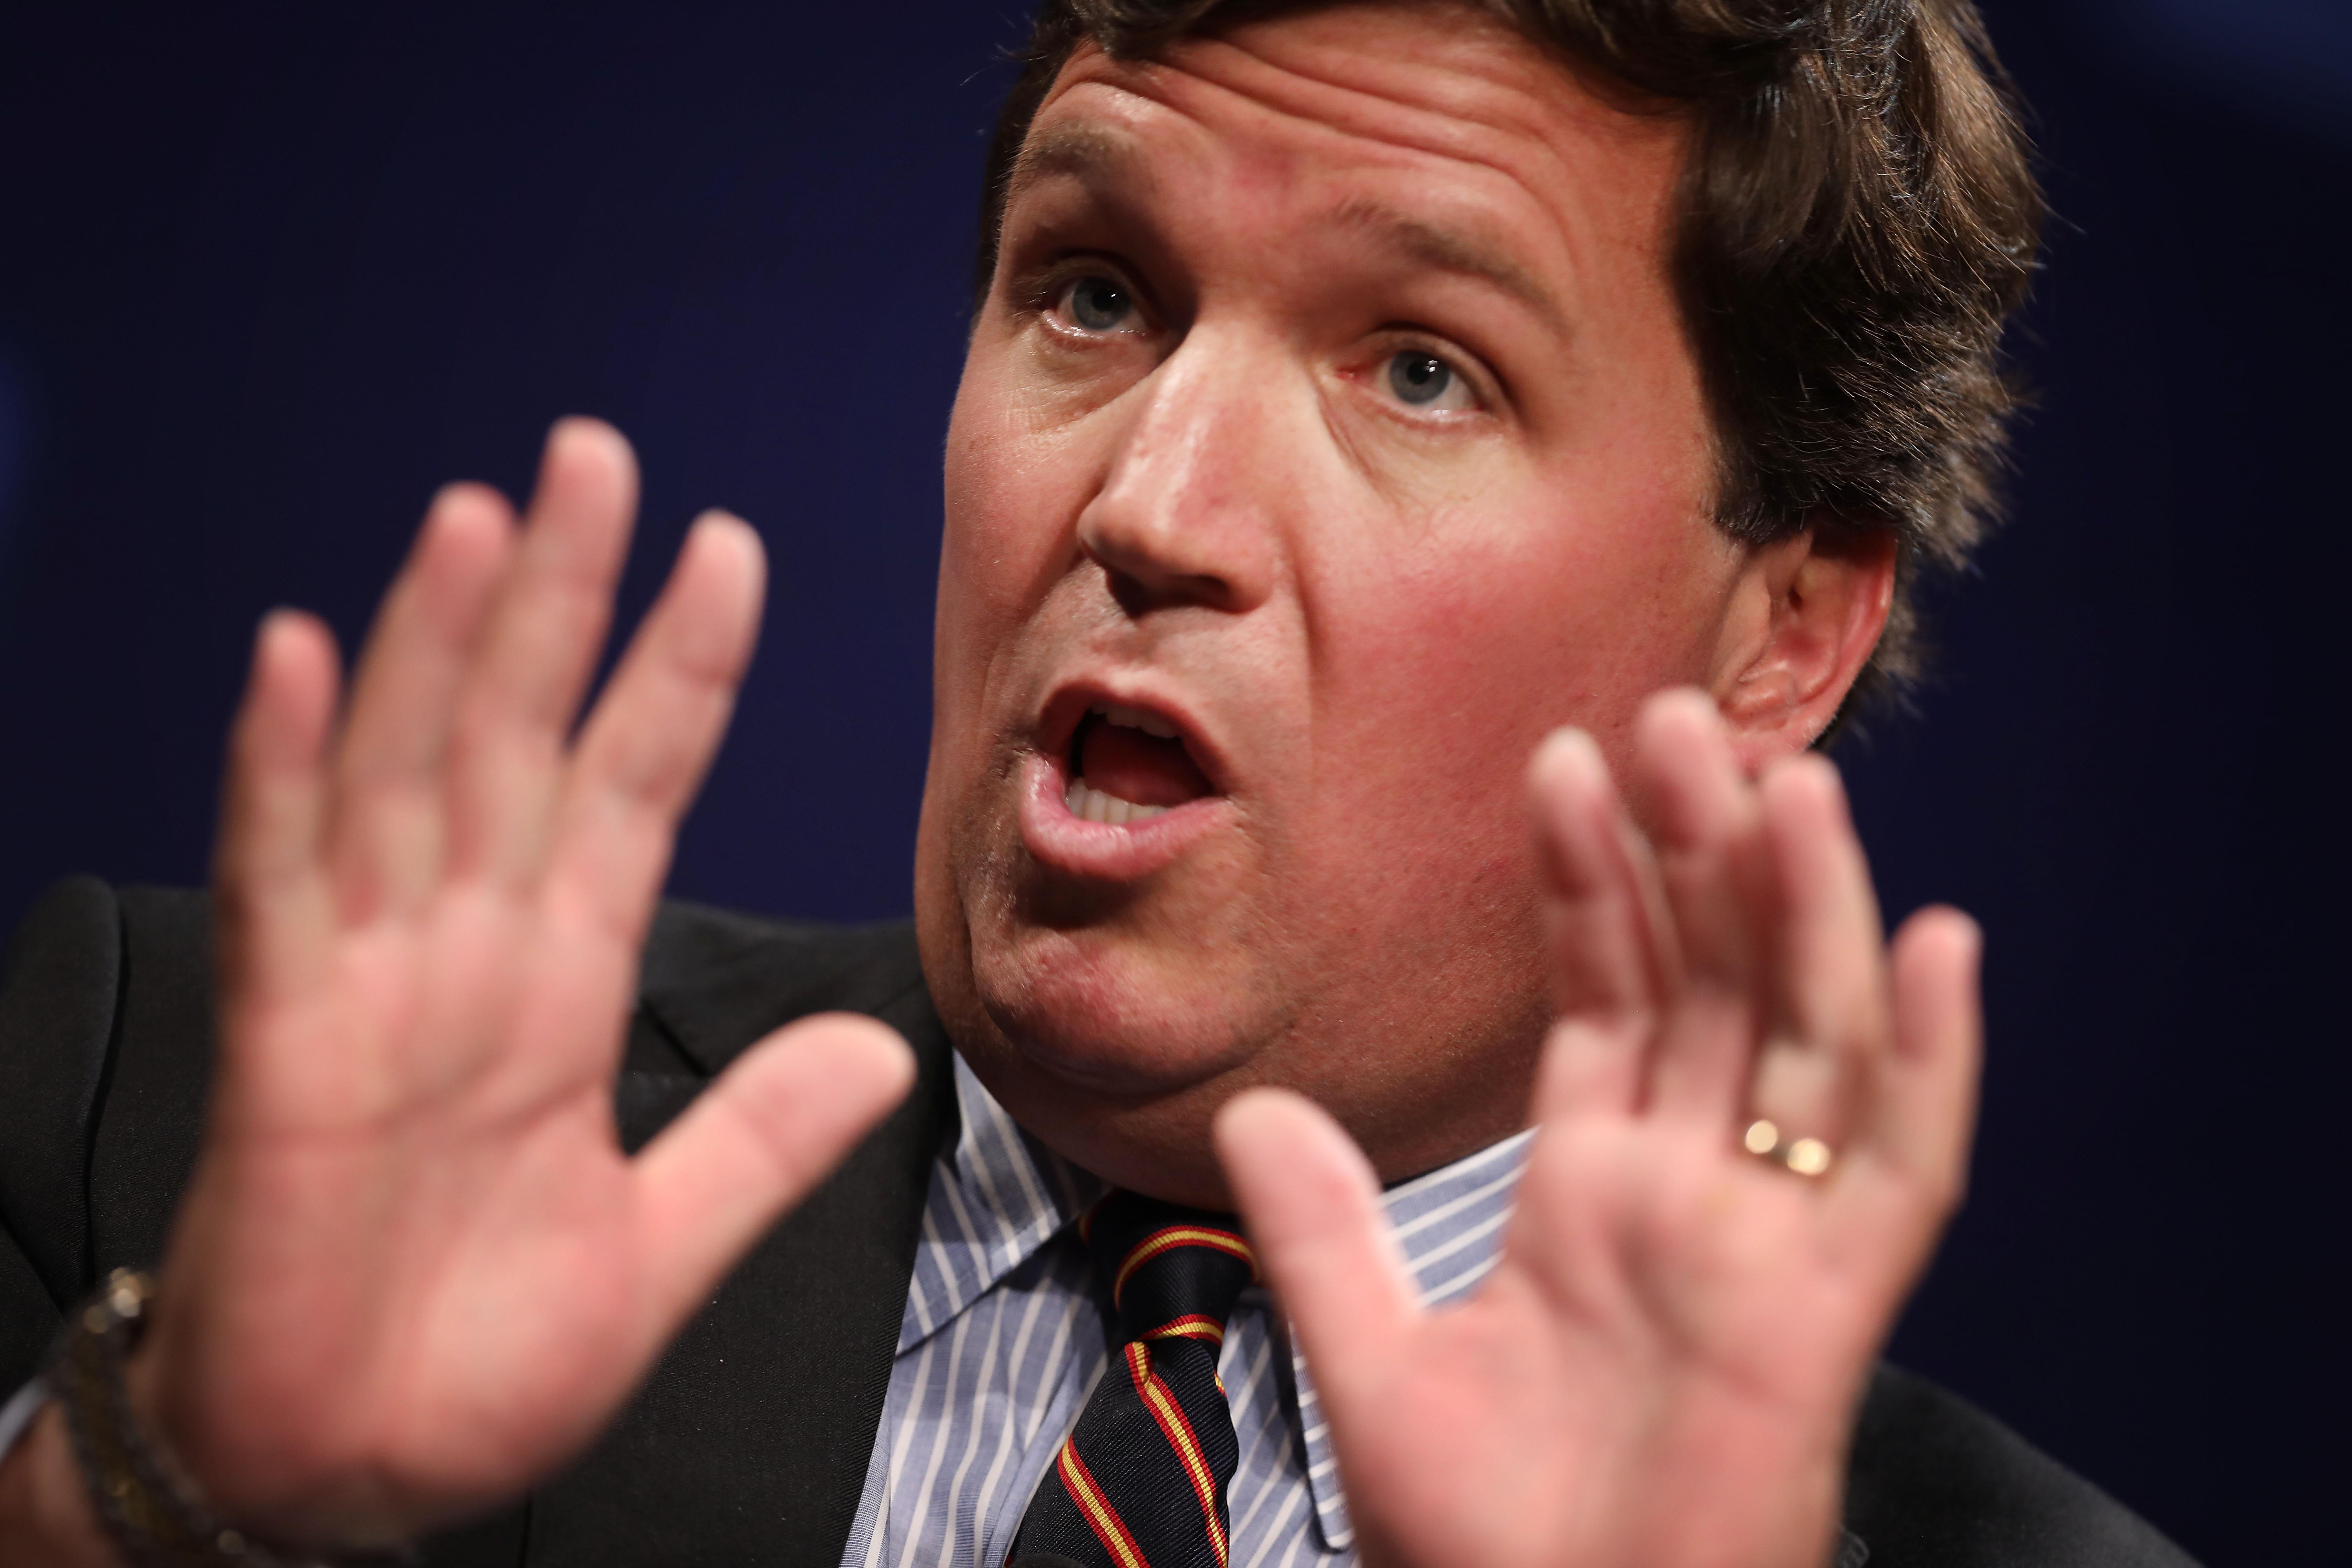 Tucker holds his hands up as if he's done nothing wrong.